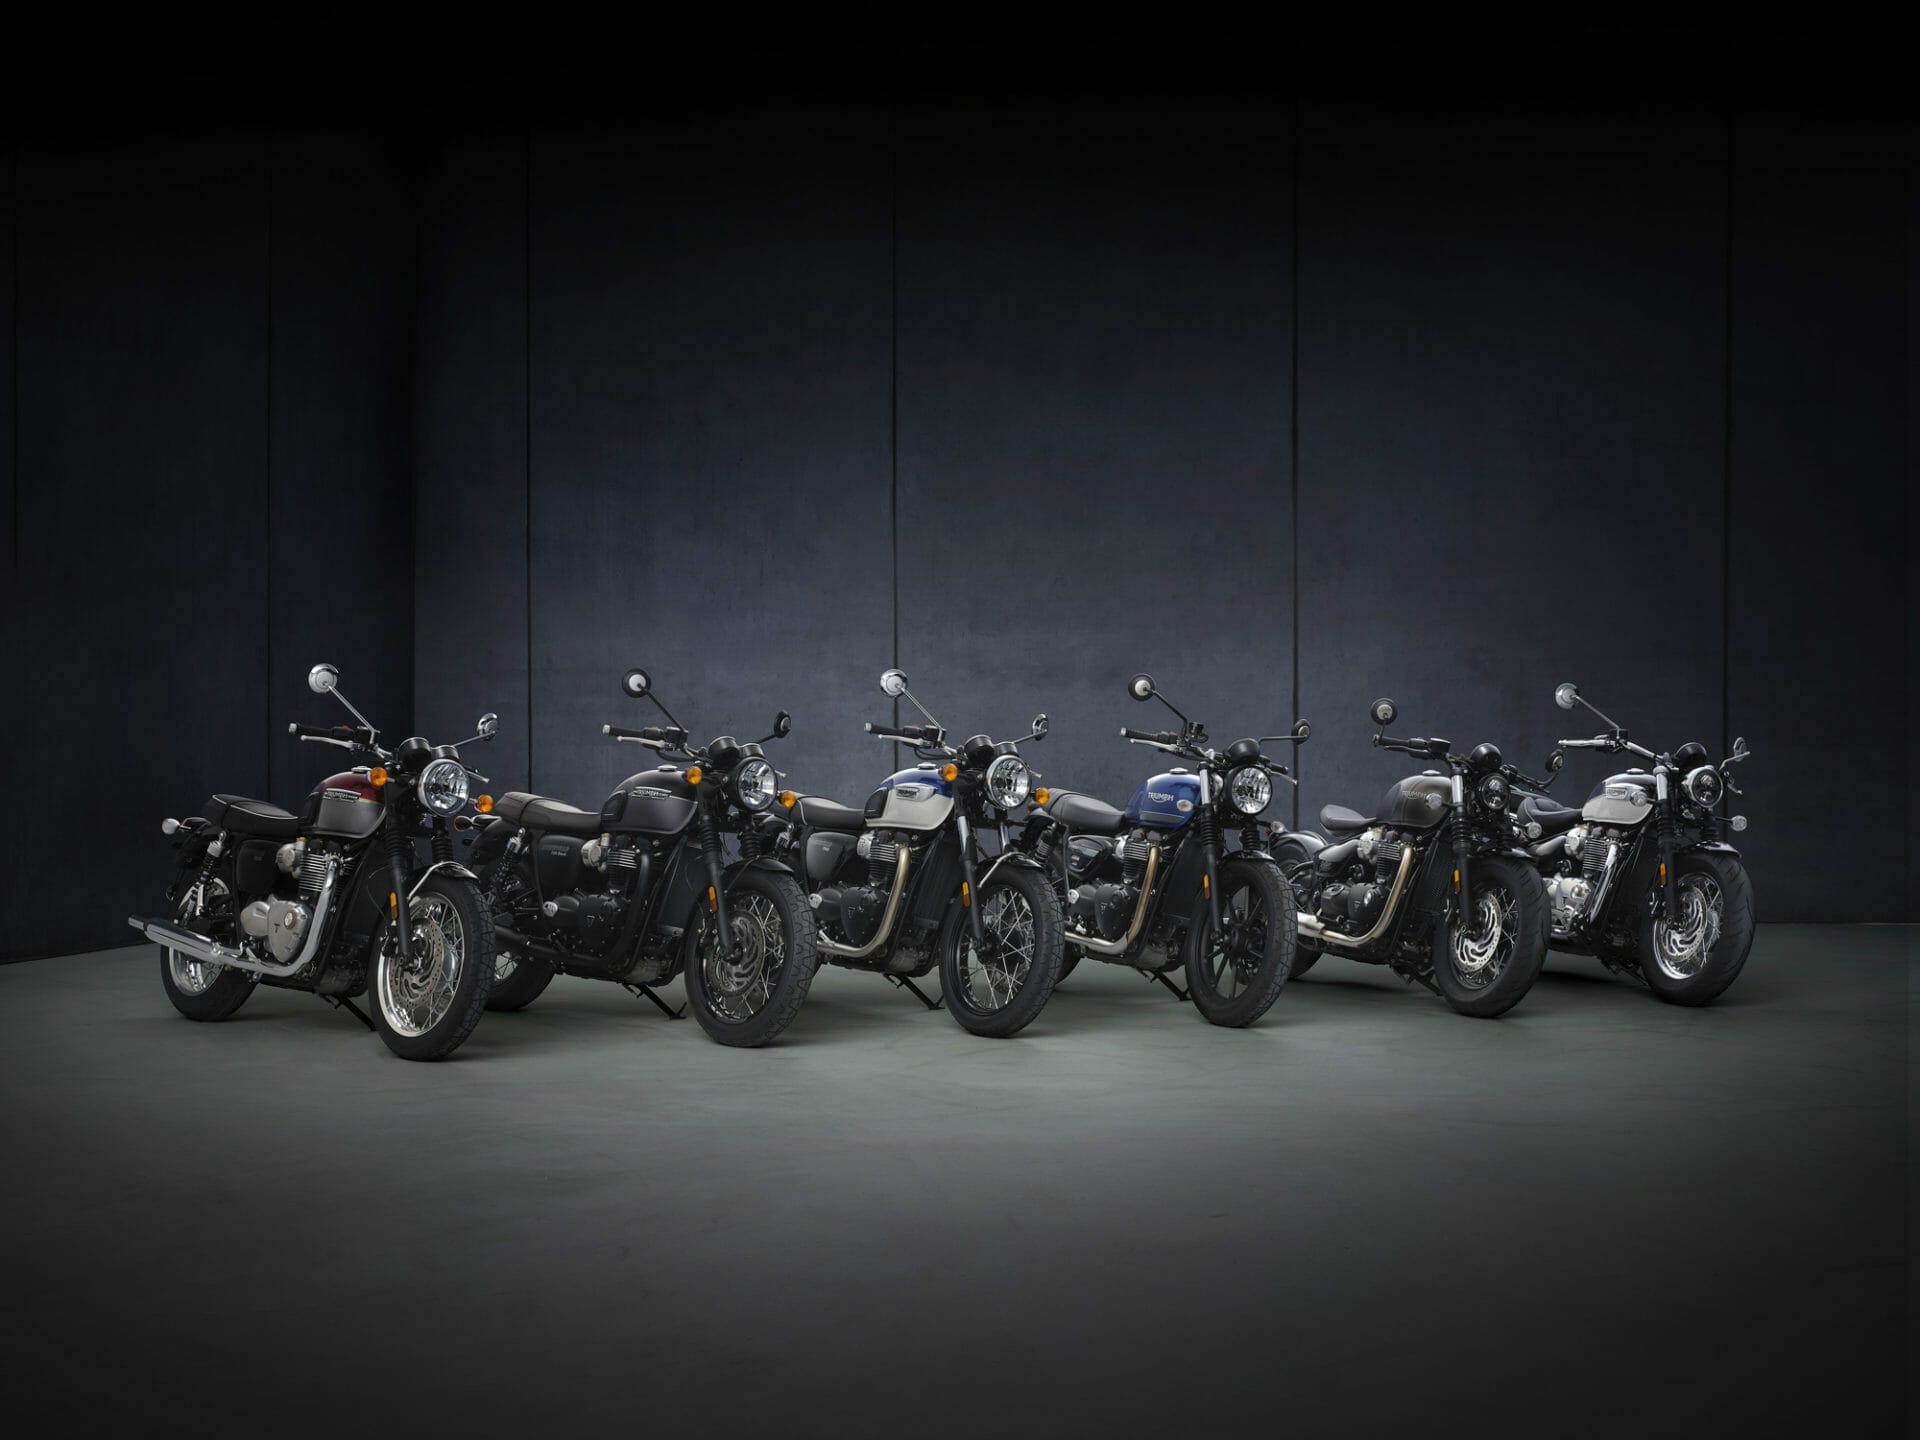 TRIUMPH presents further developed Bonneville series for 2021
- also in the MOTORCYCLES.NEWS APP